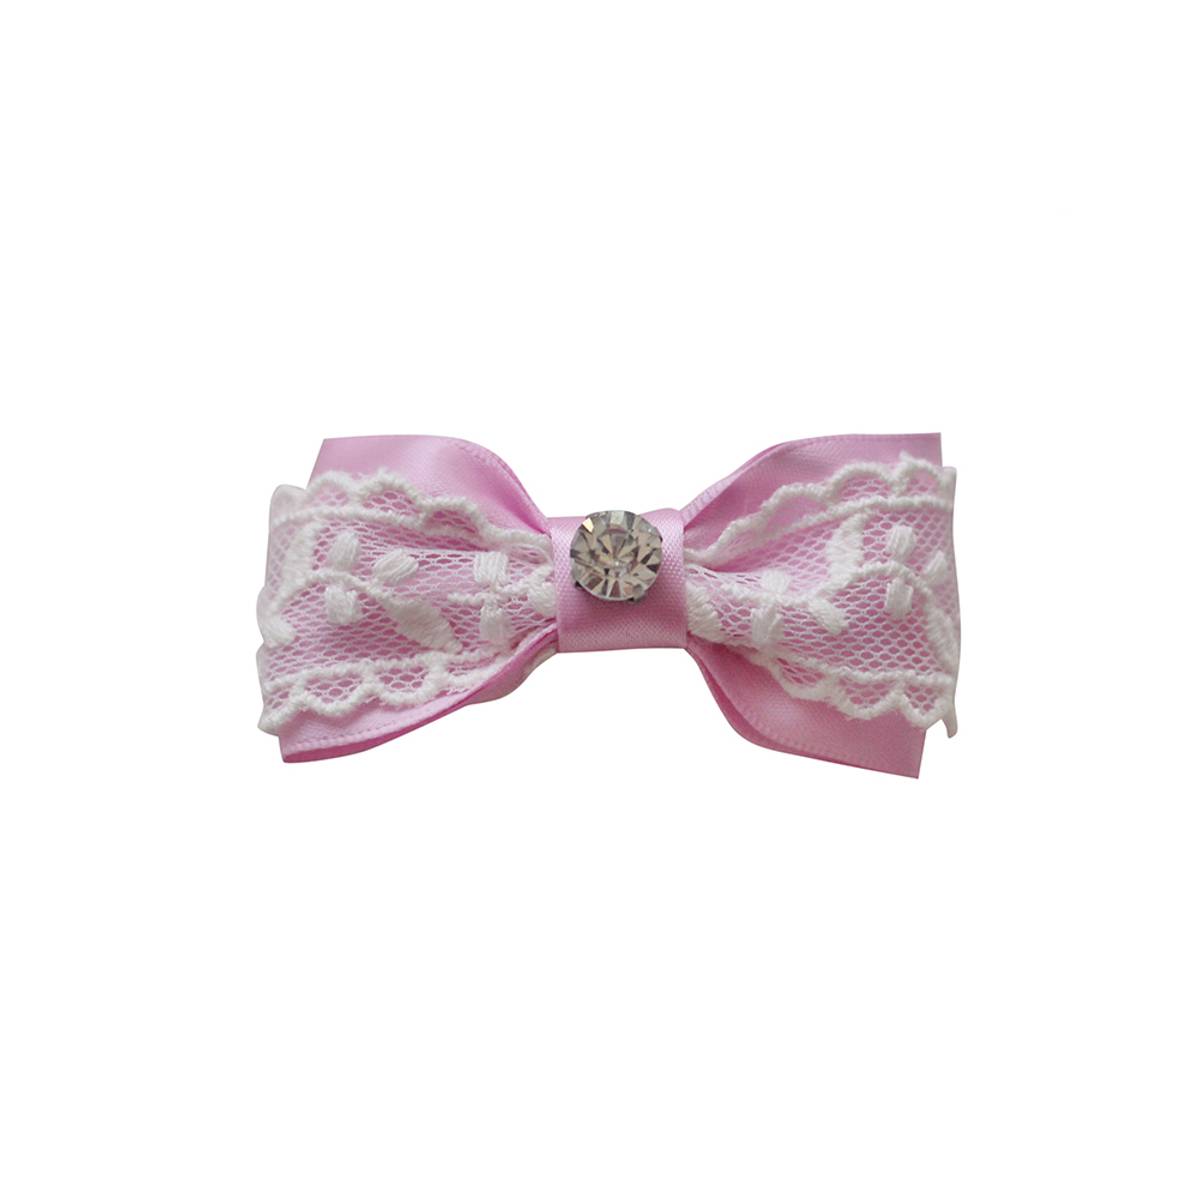 Vintage Girl Dog Hair Clip in Pink | Pawlicious & Company